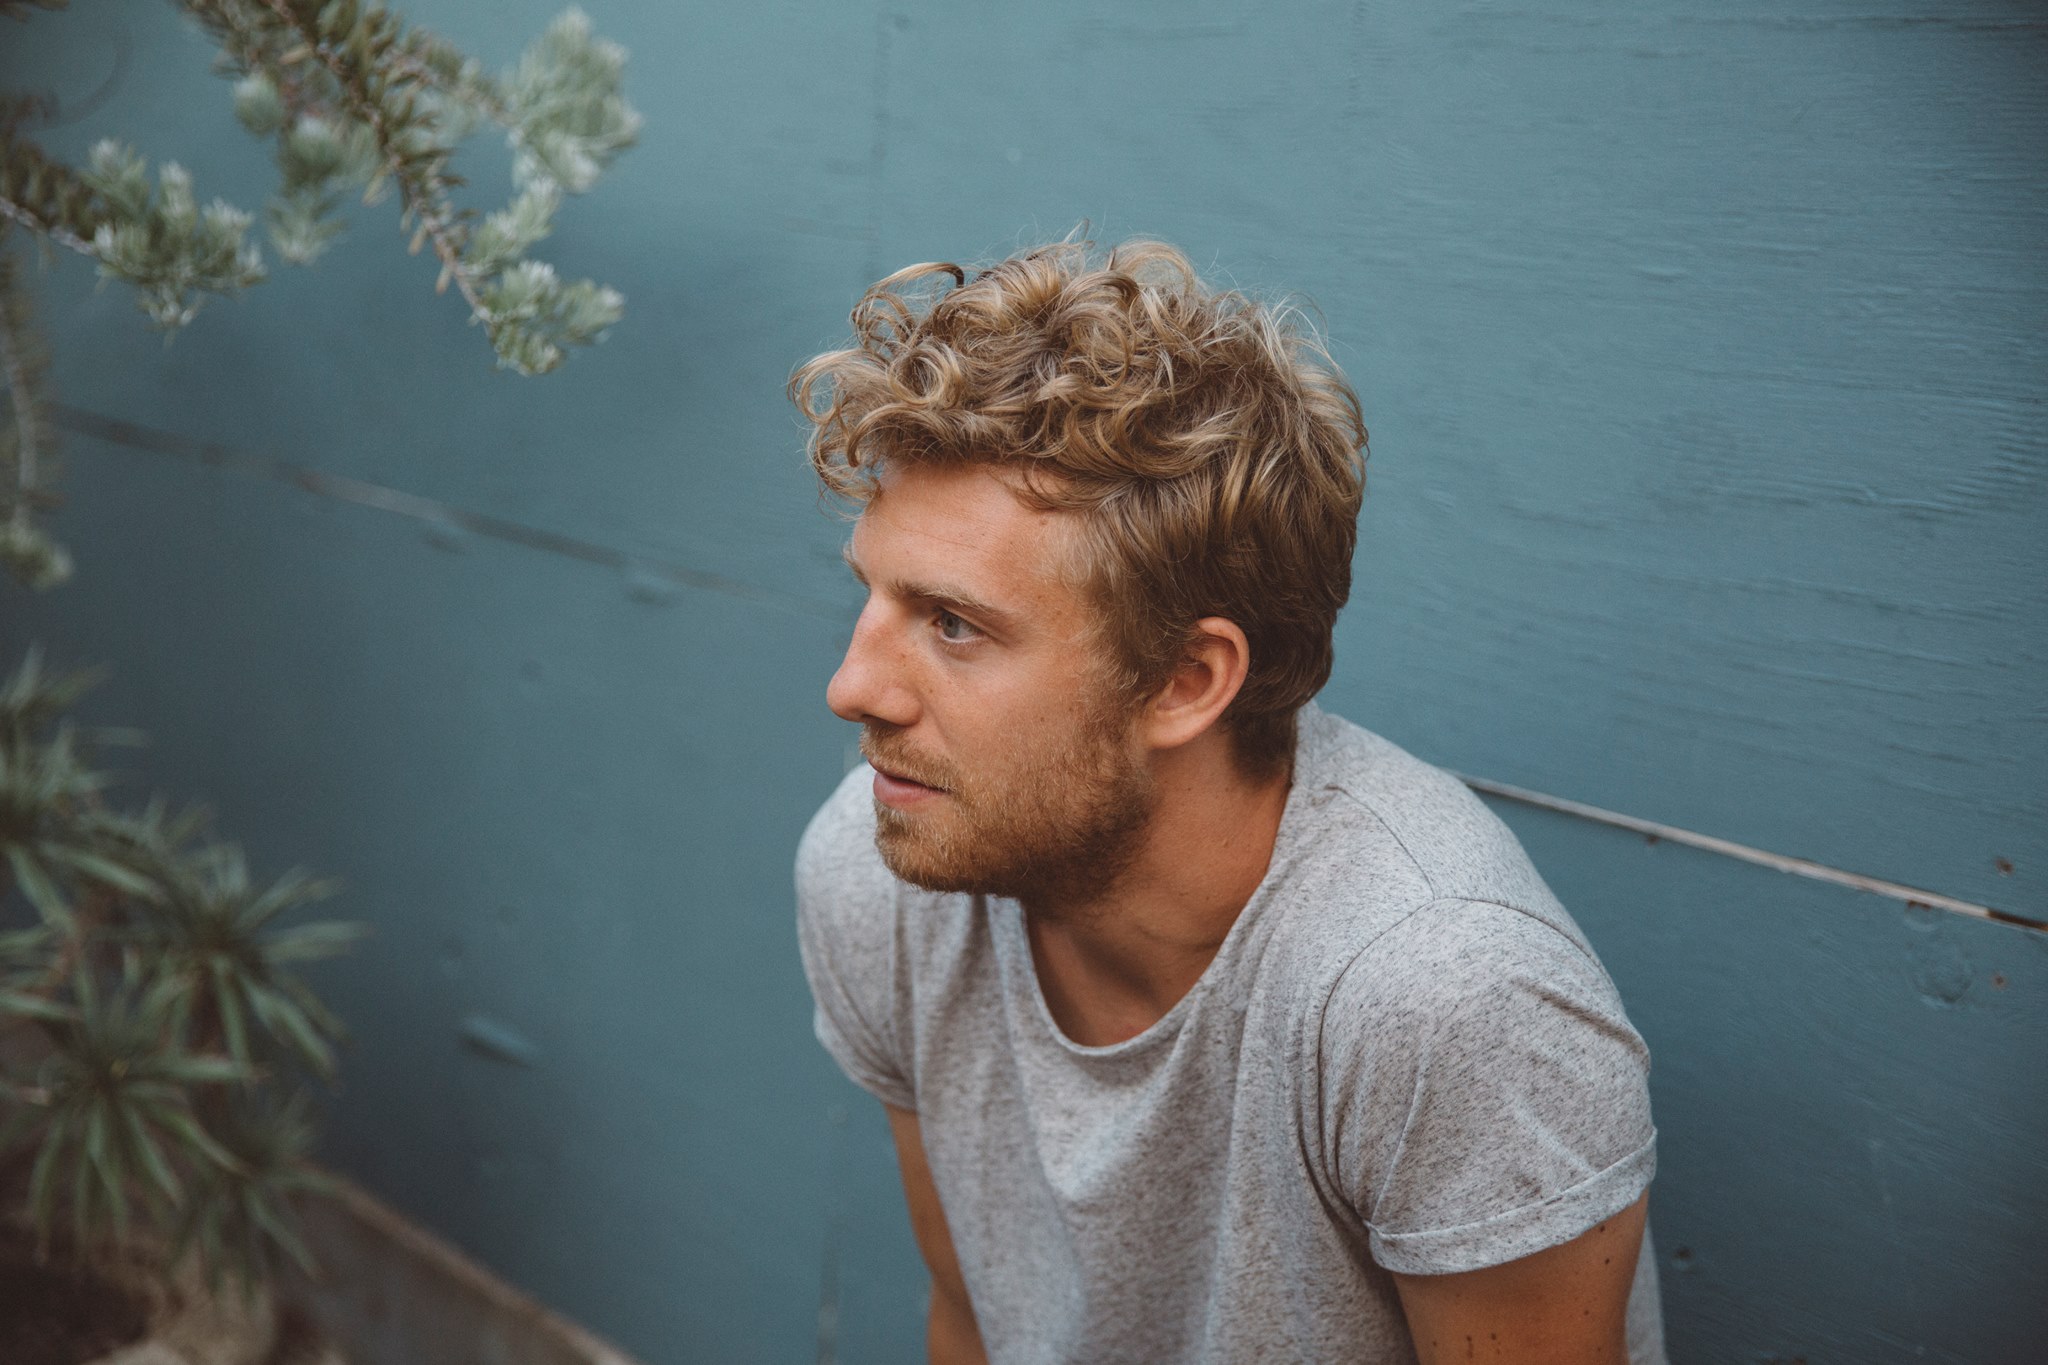 The story and meaning of the song 'Pieces - Andrew Belle 